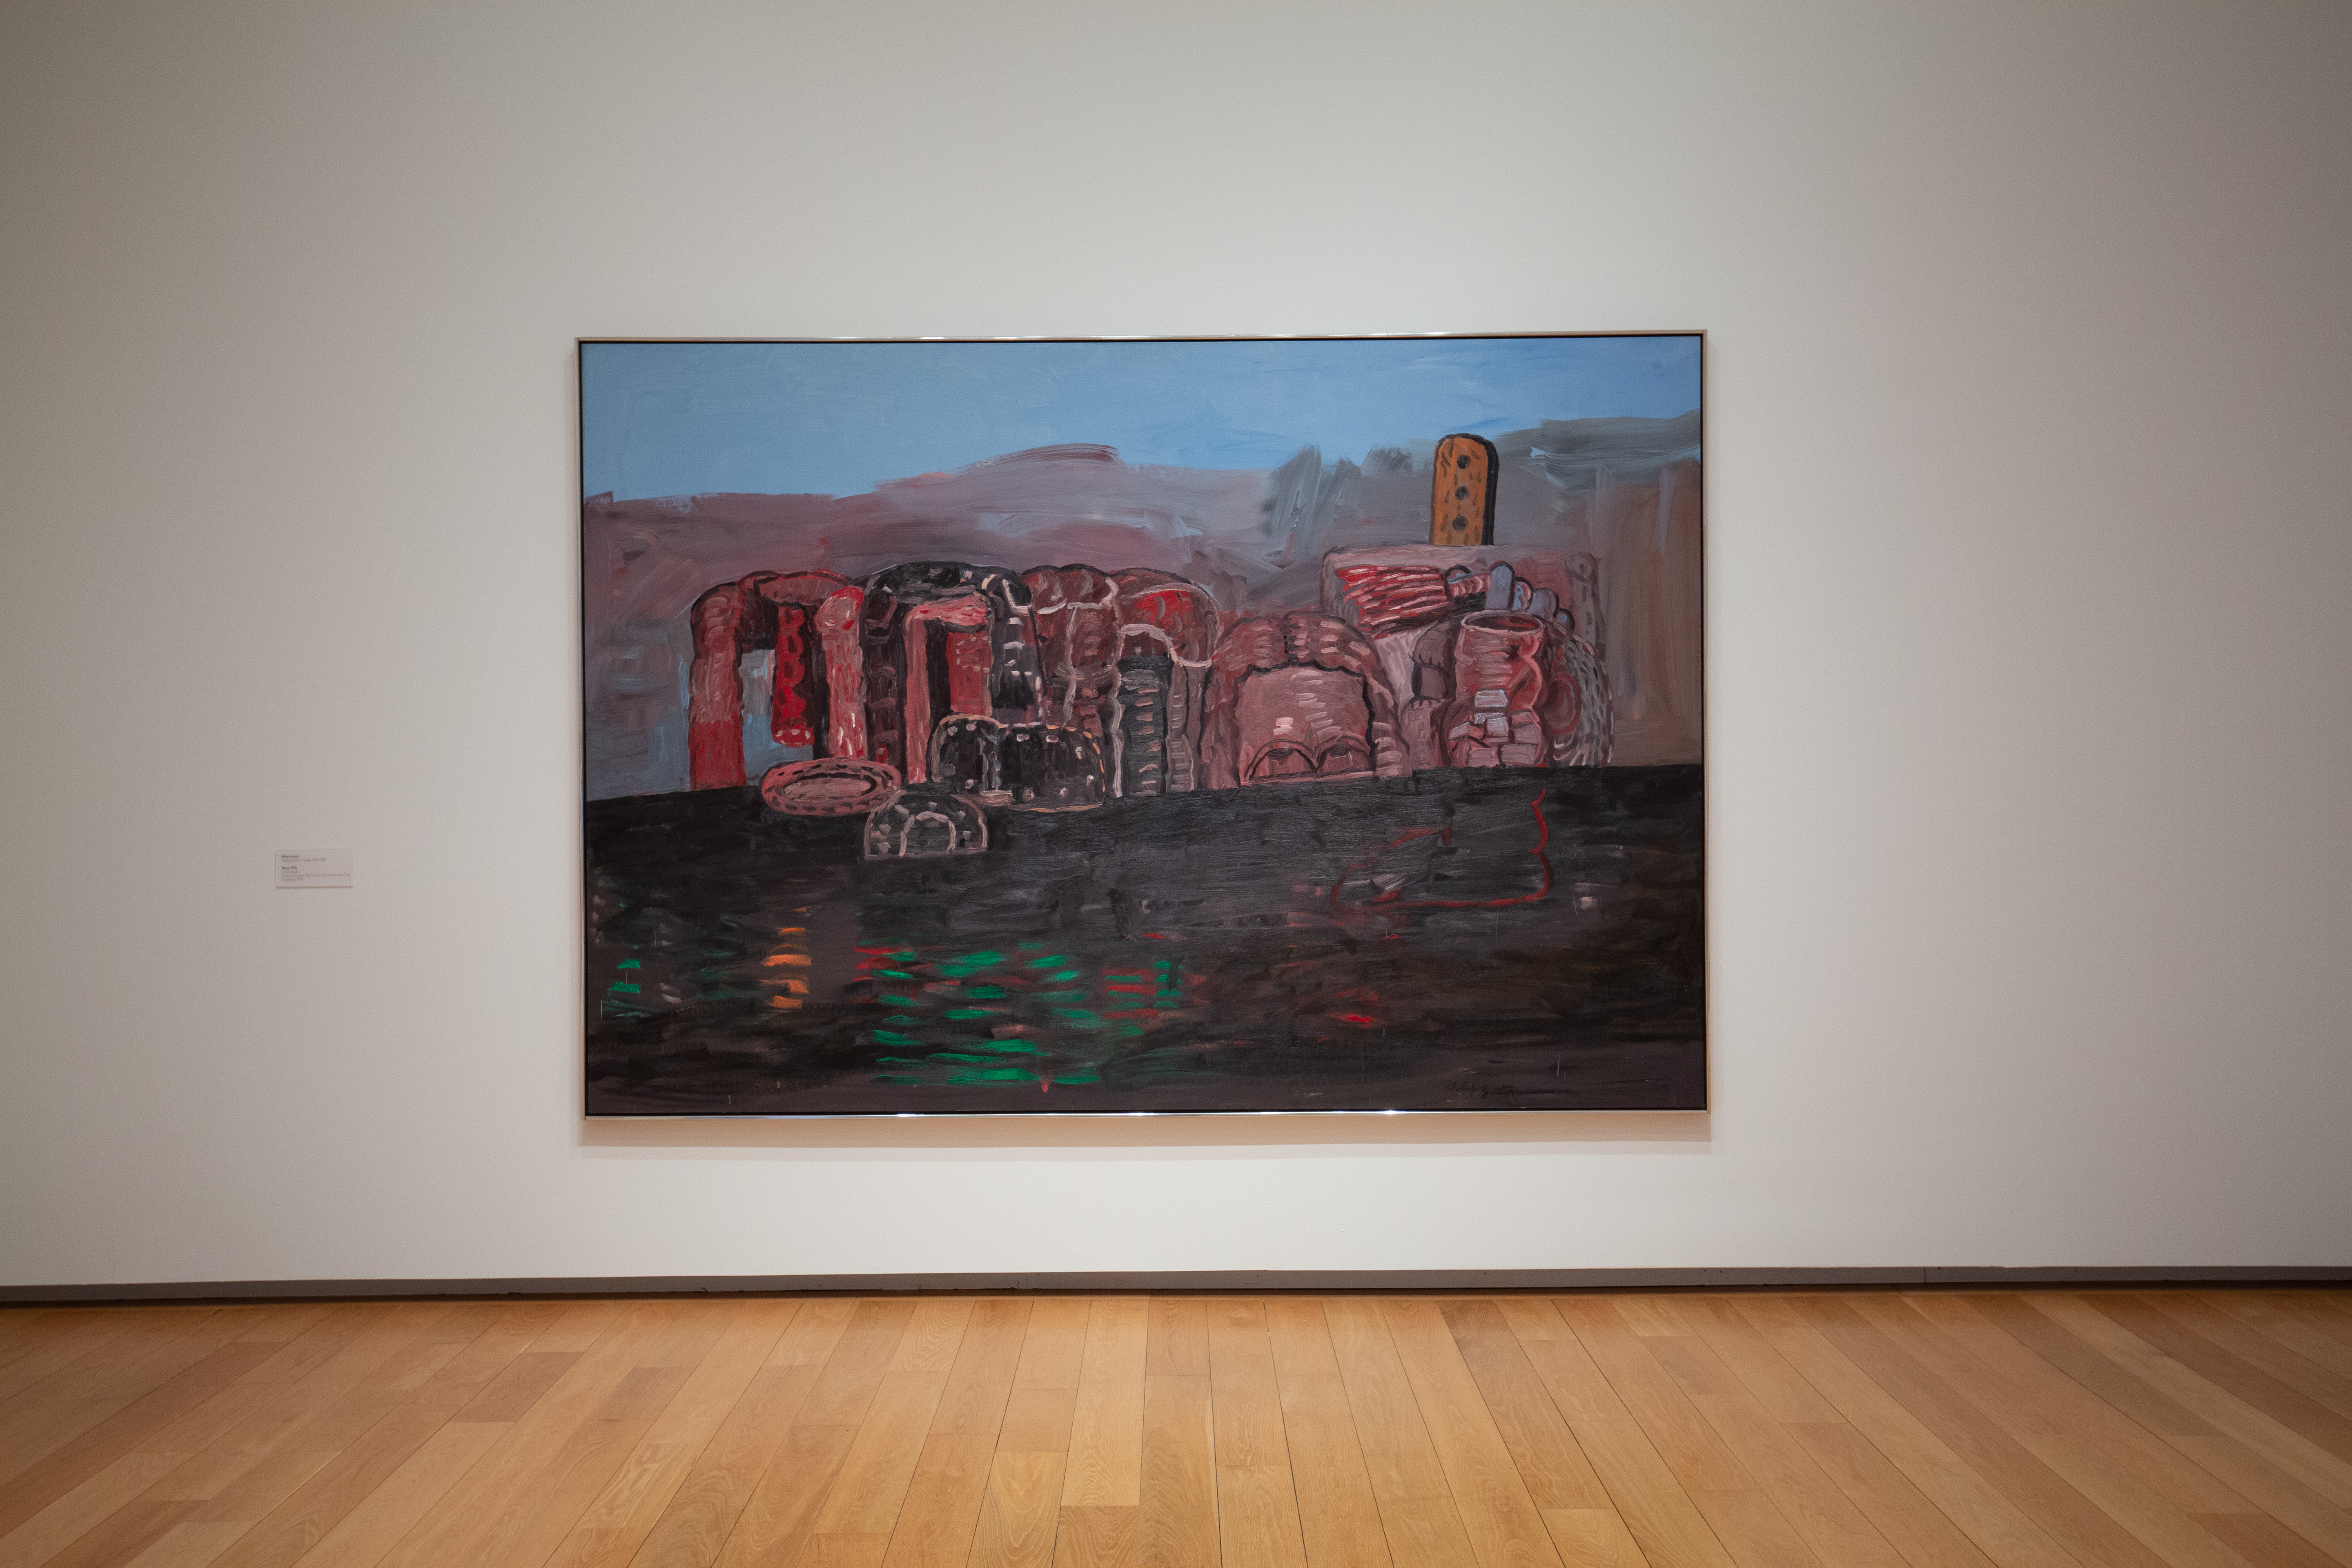 Philip_Guston_Wharf_1976_in_galleries